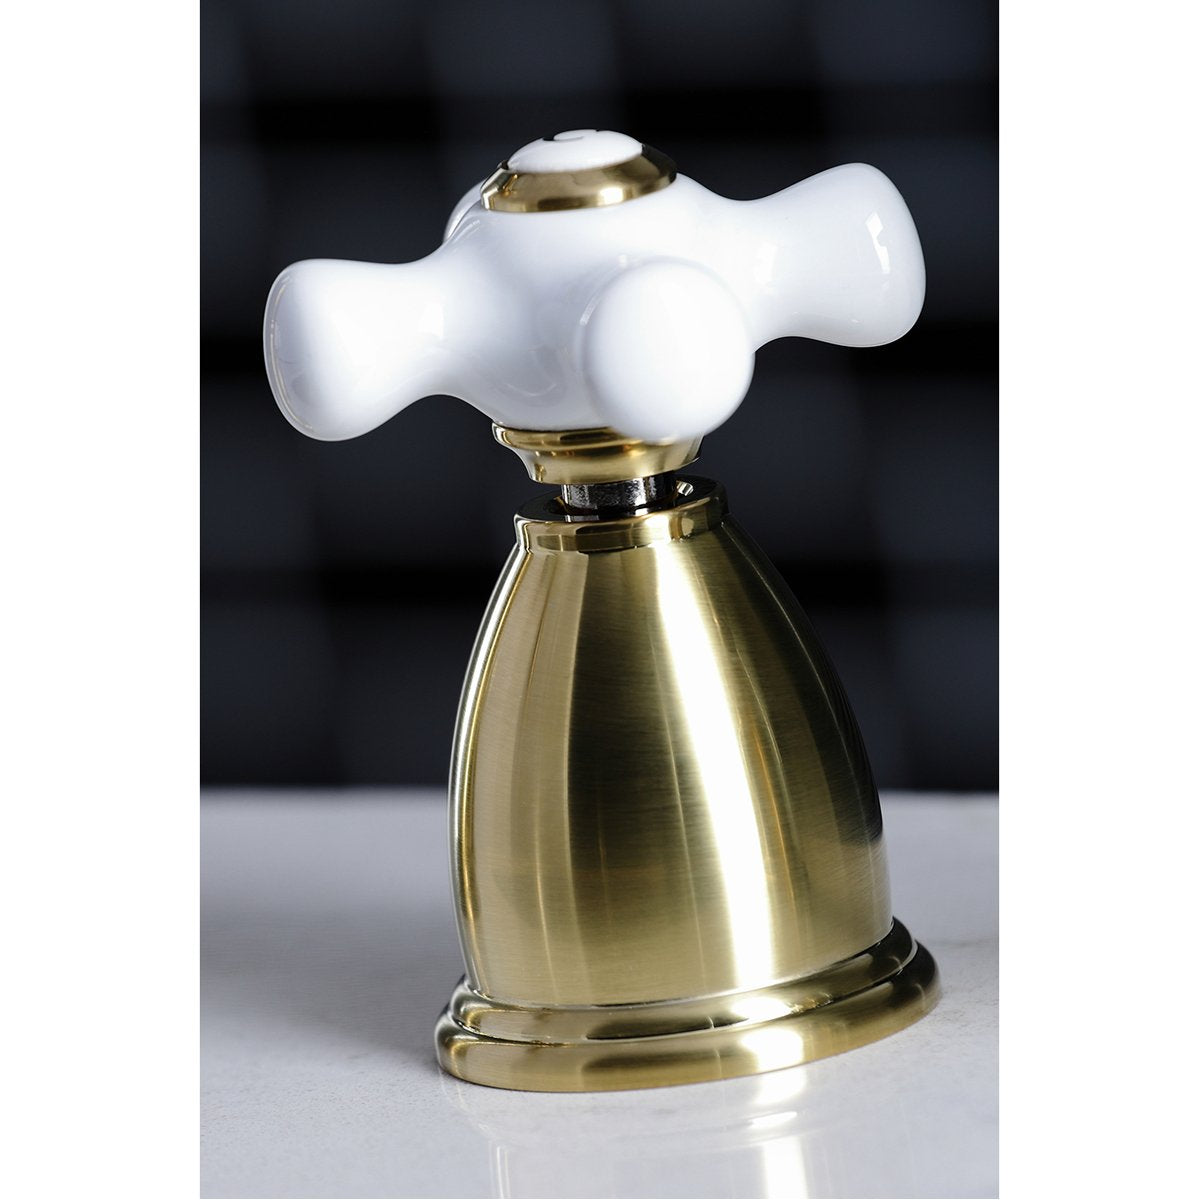 Kingston Brass Heritage 4-Hole Widespread Kitchen Faucet with Brass Sprayer